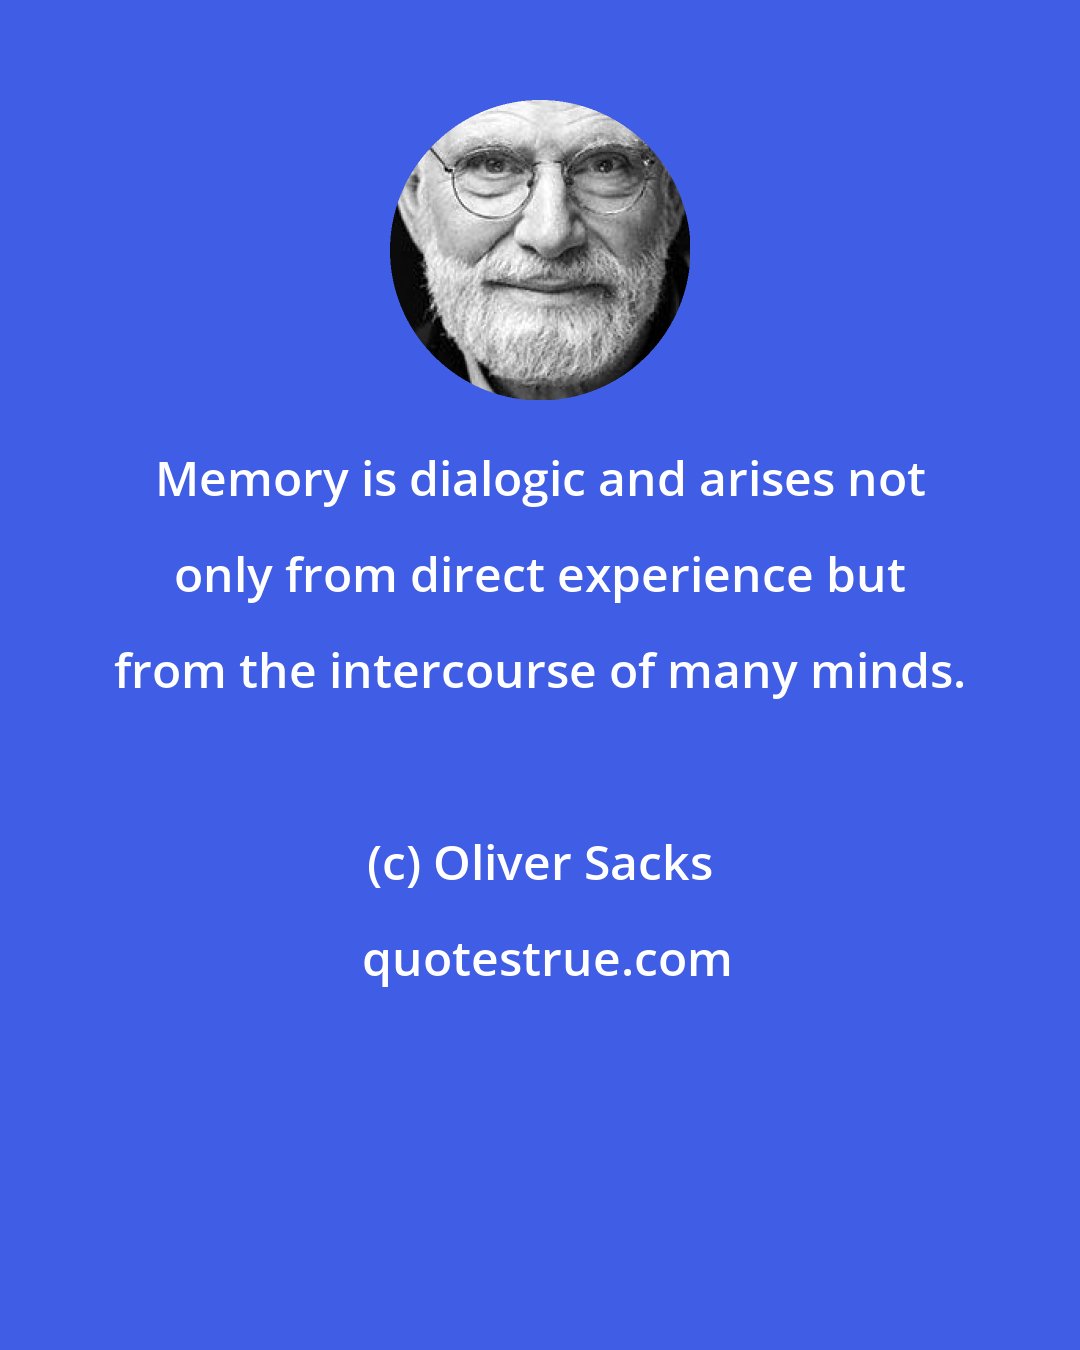 Oliver Sacks: Memory is dialogic and arises not only from direct experience but from the intercourse of many minds.